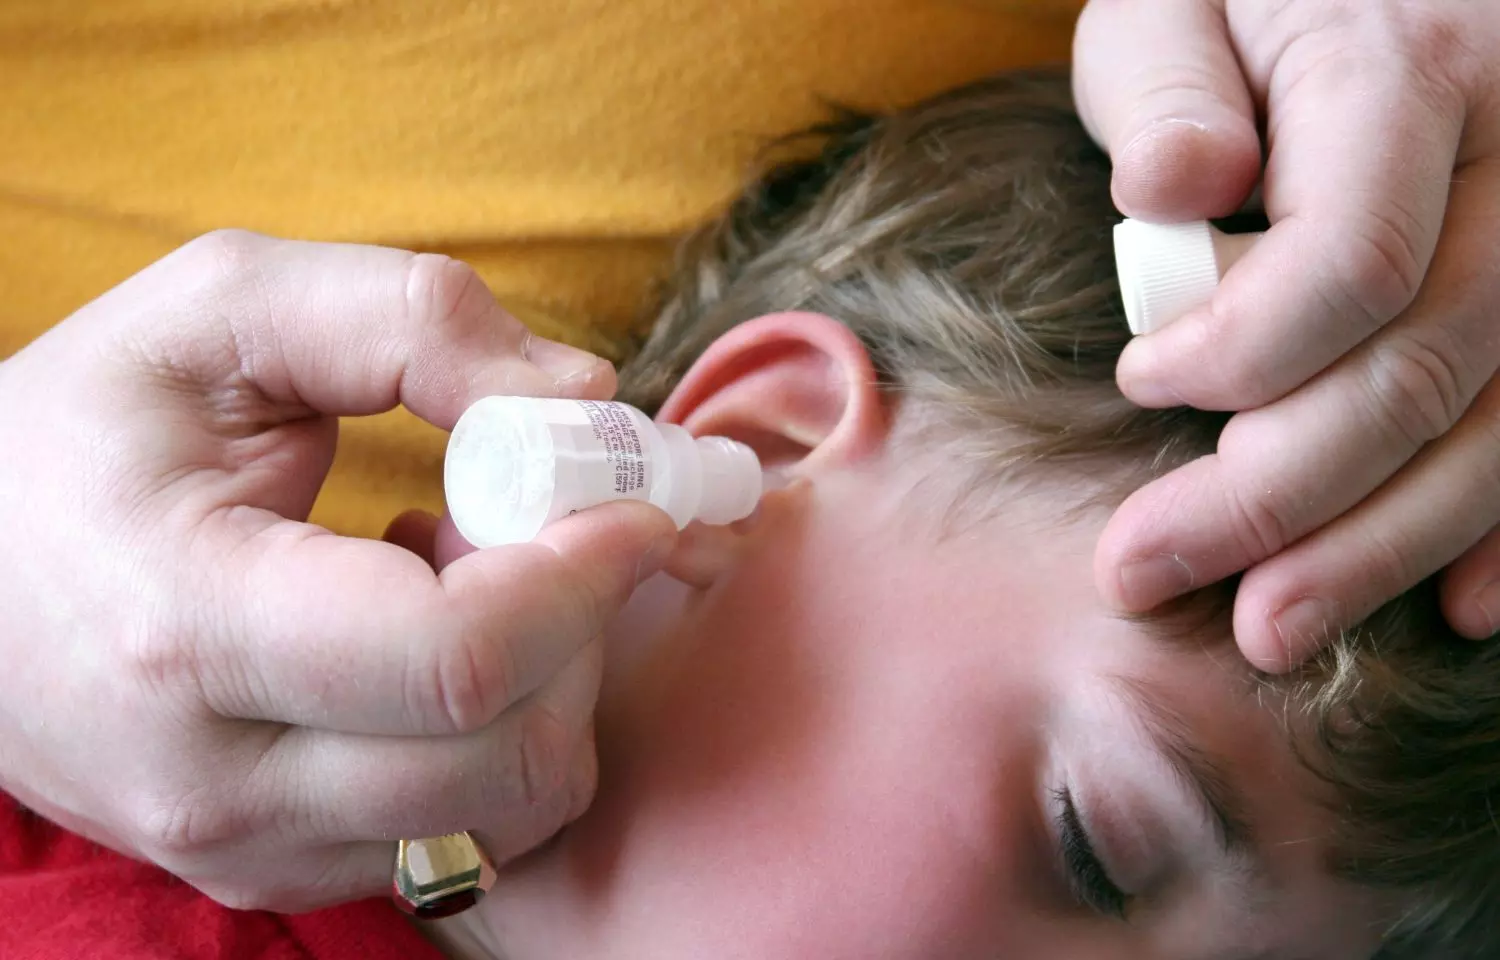 AI model outperforms clinicians in diagnosis of pediatric ear infections